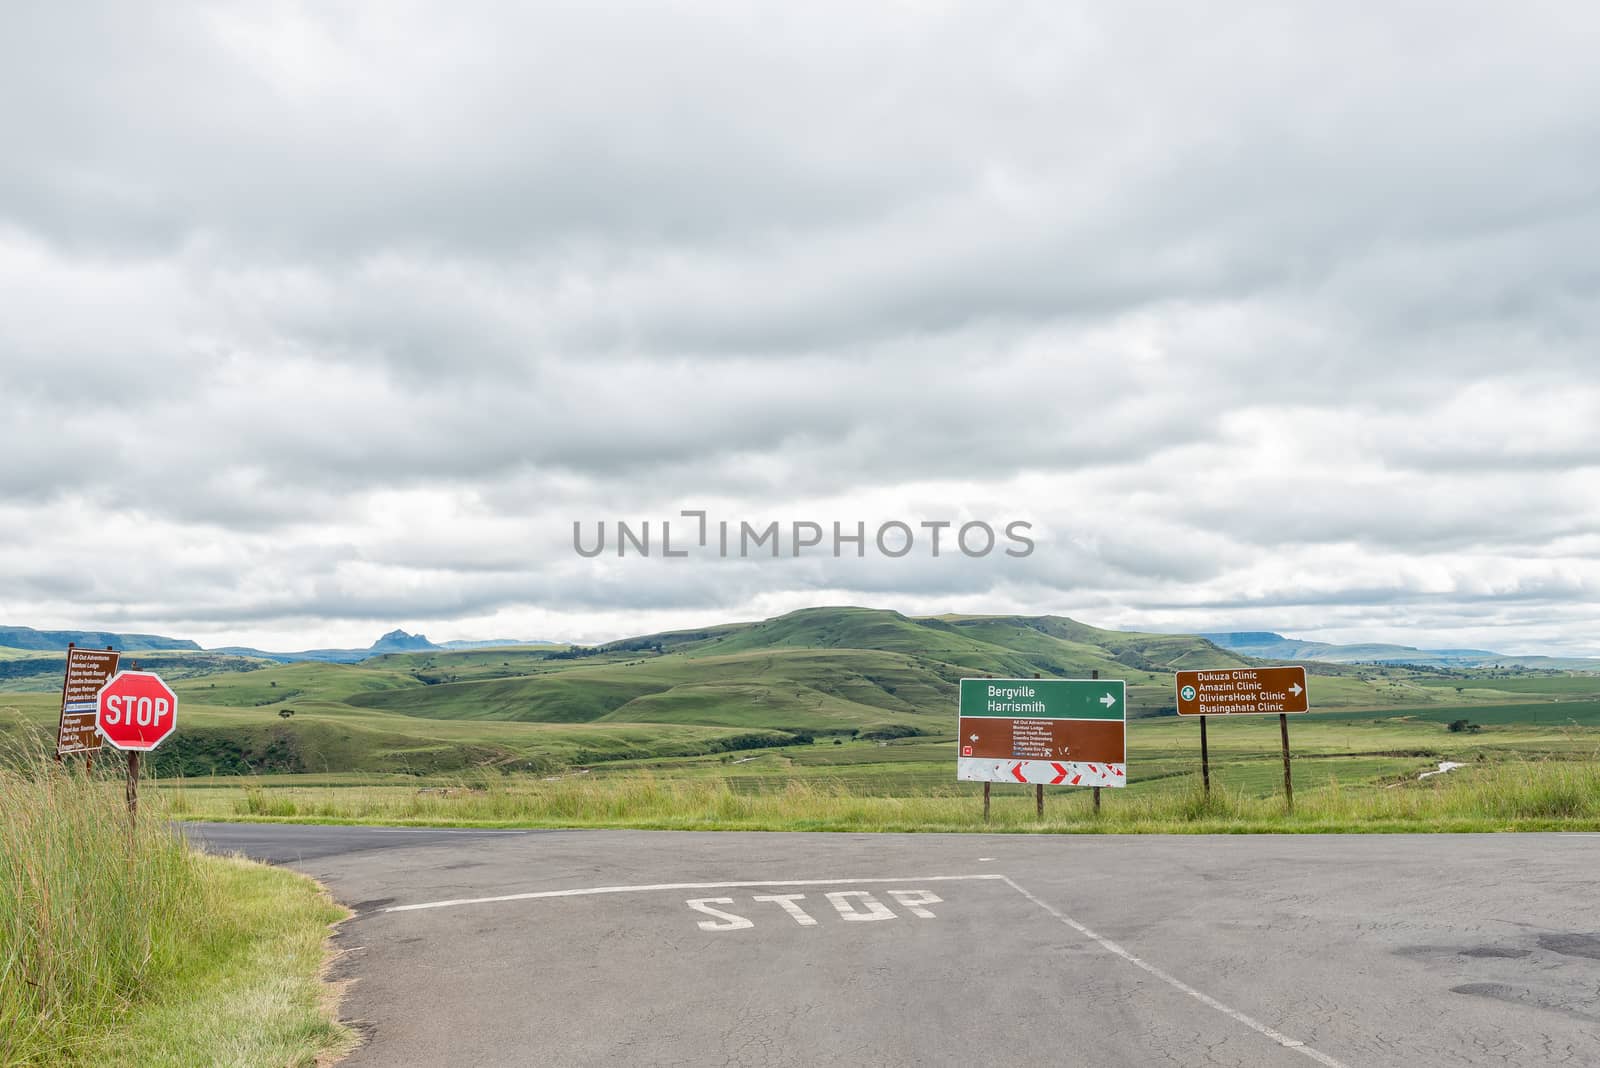 Junction between roads D119 and D475 near Bonjaneni in Kwazulu-Natal. A stop sign and directional signs are visible